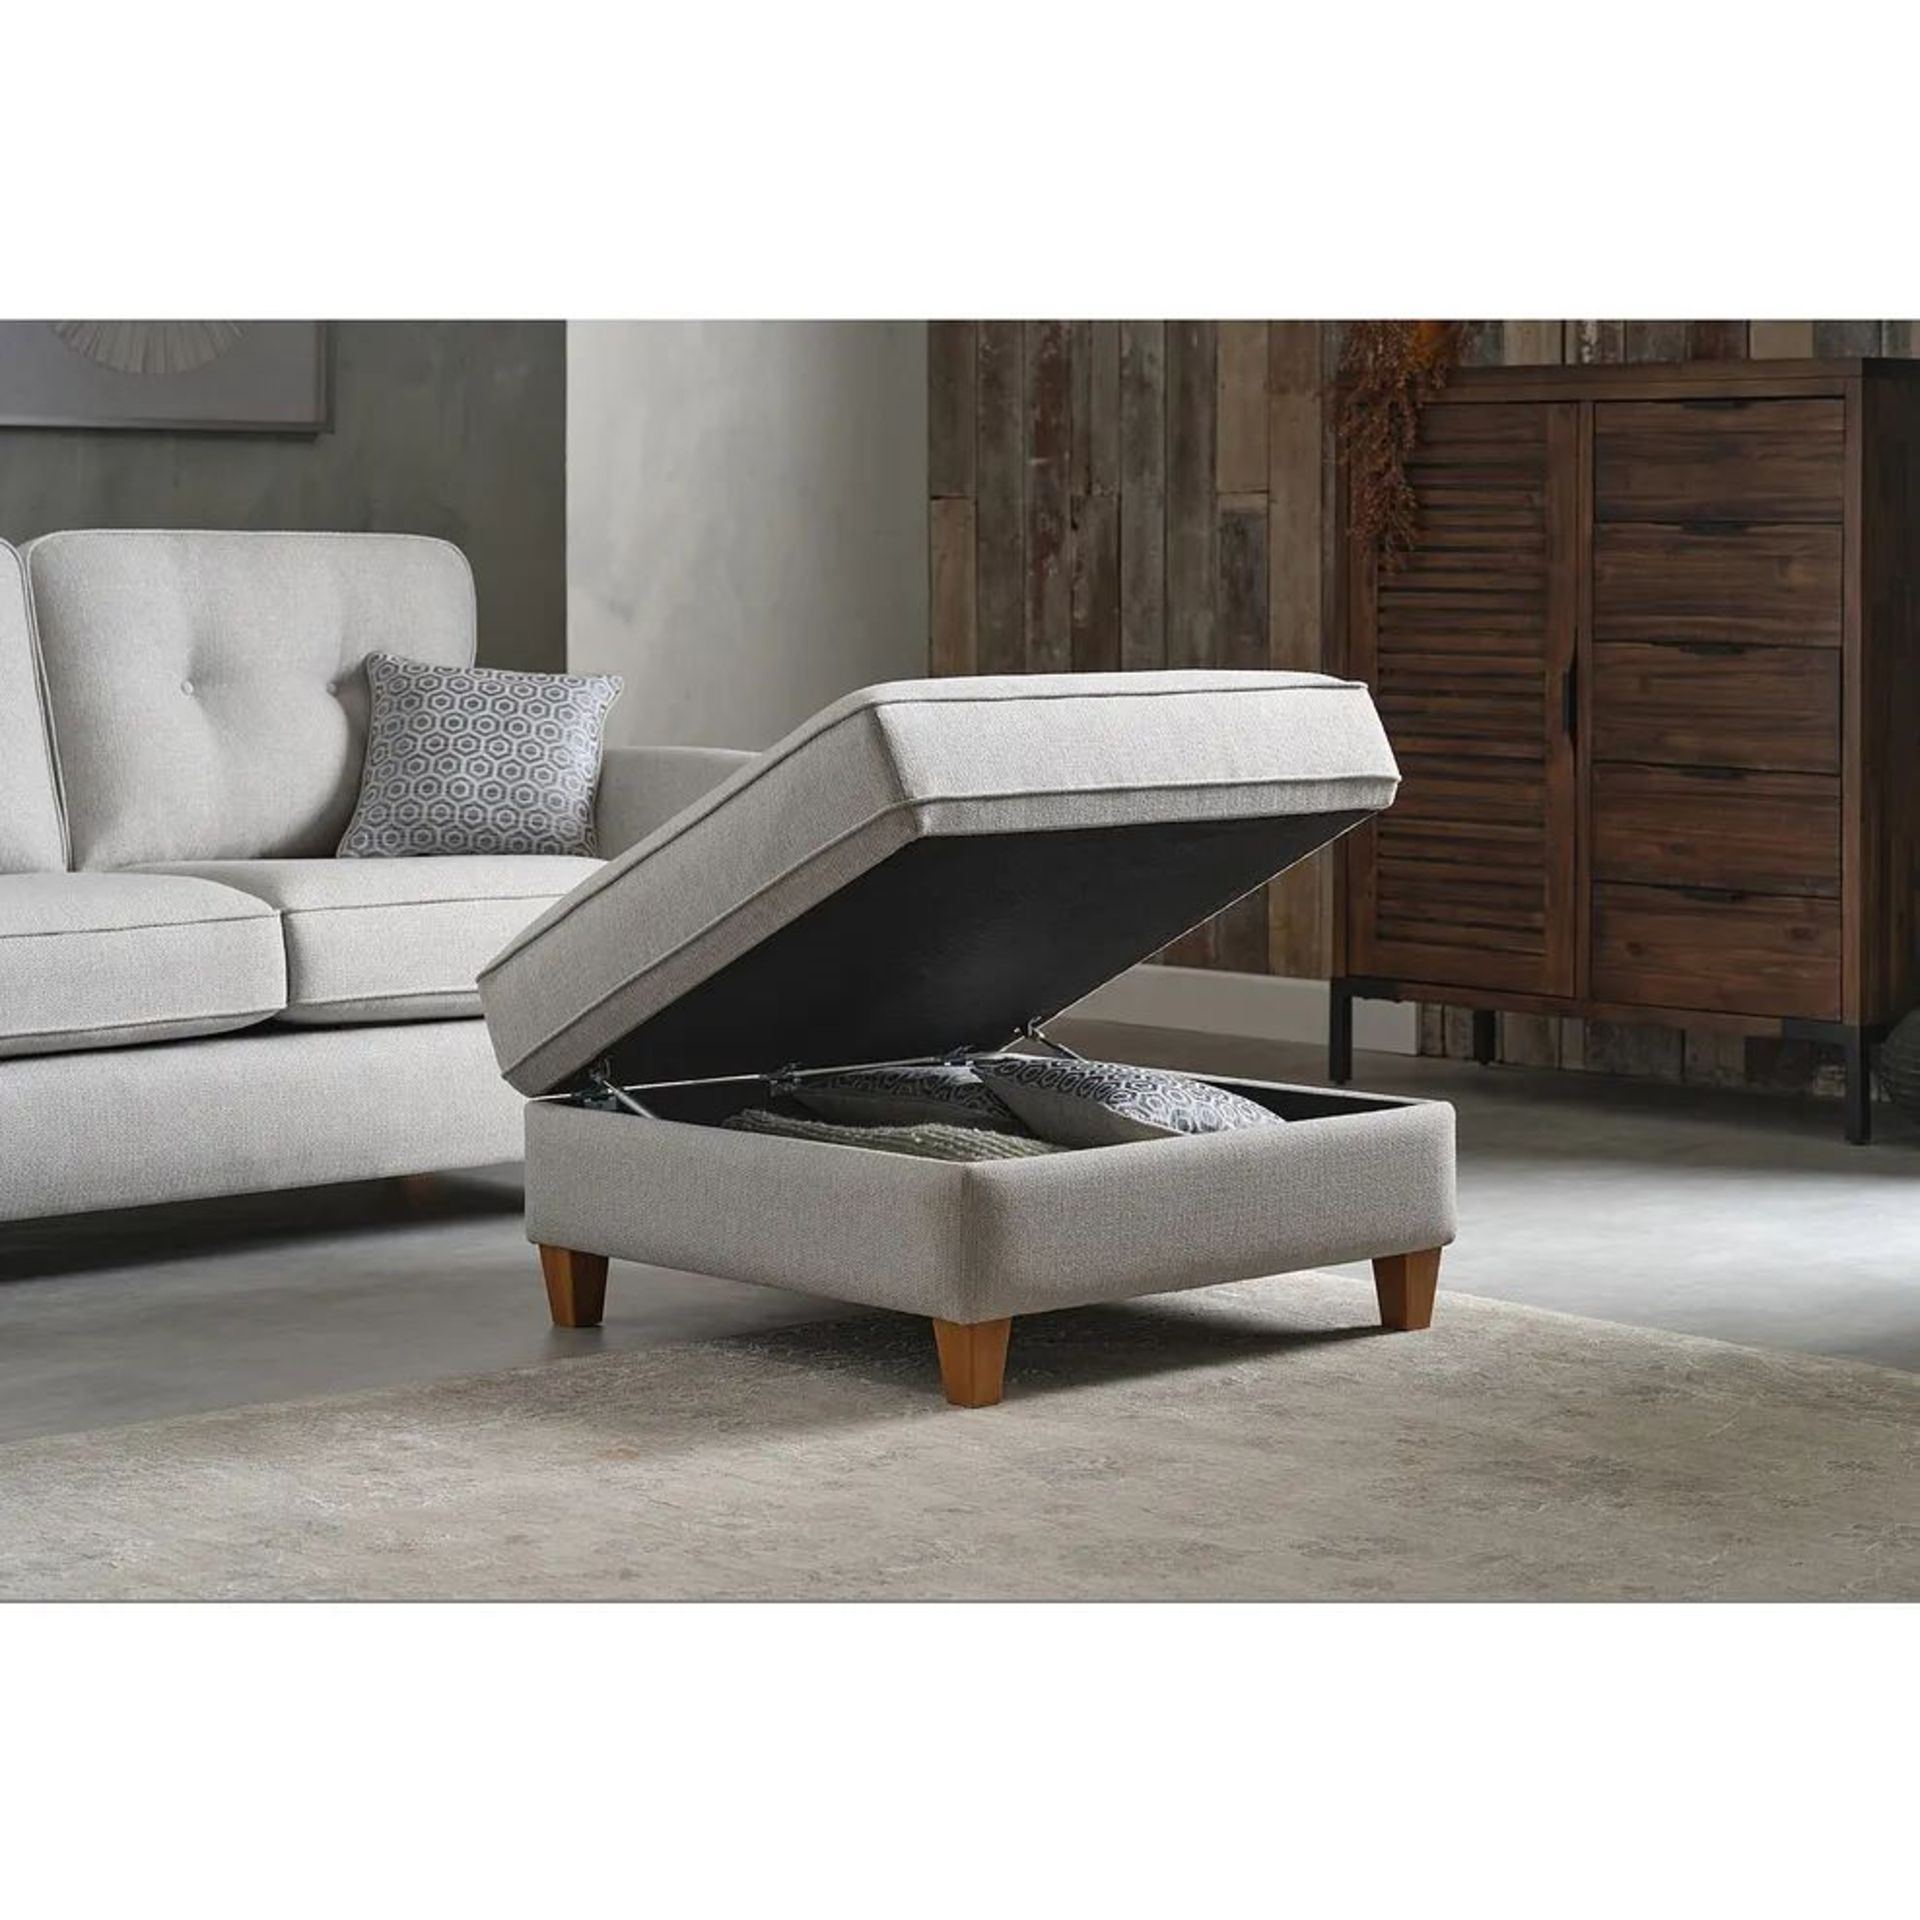 BRAND NEW INCA Large Storage Footstool - SILVER FABRIC. RRP £529. Our large Inca storage footstool - Image 6 of 7